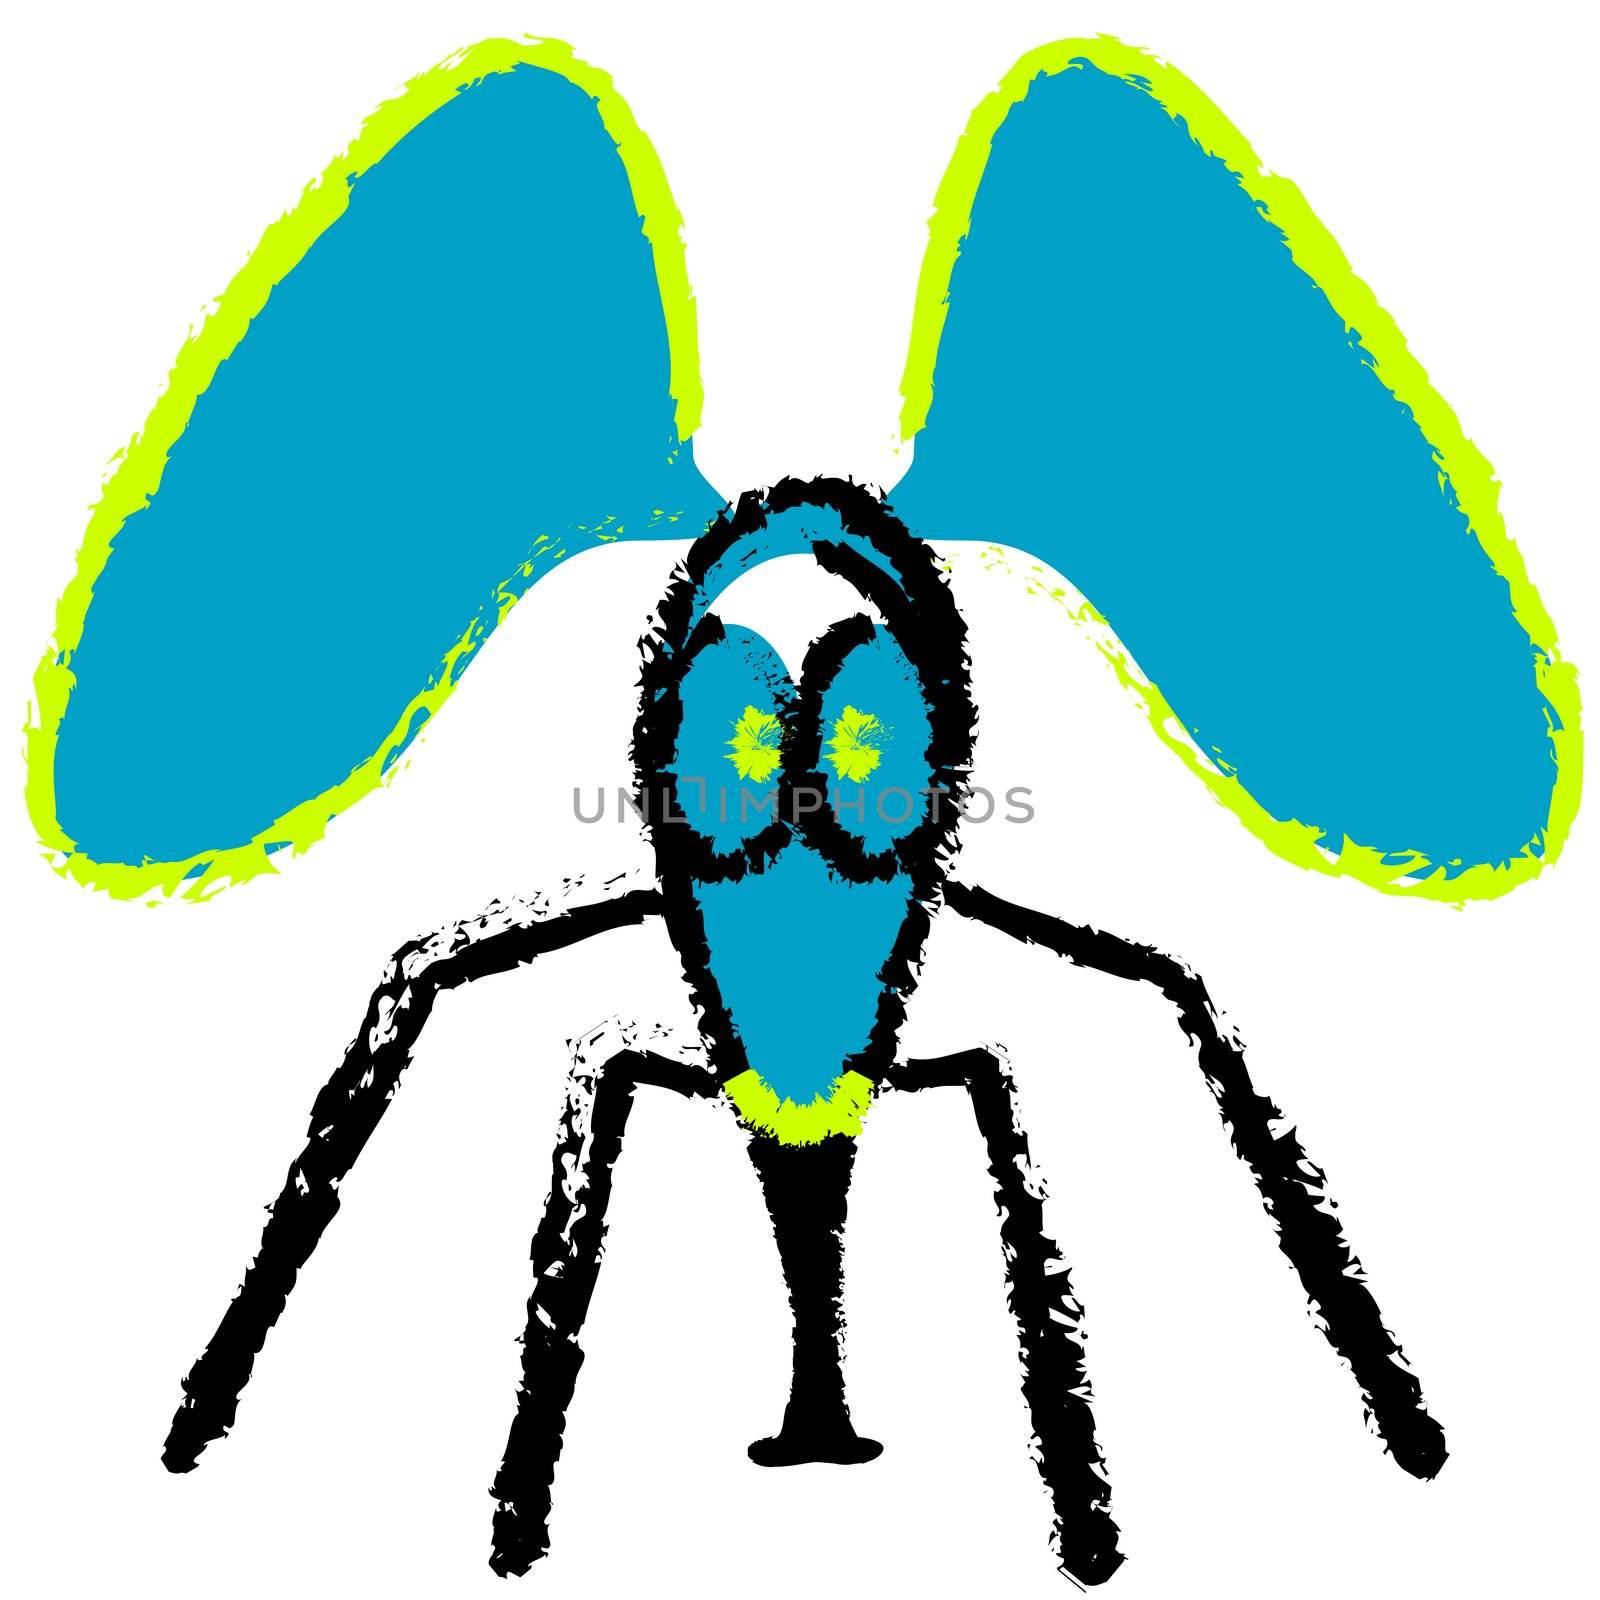 crazy fly, vector art illustration, more vector drawings in my gallery.